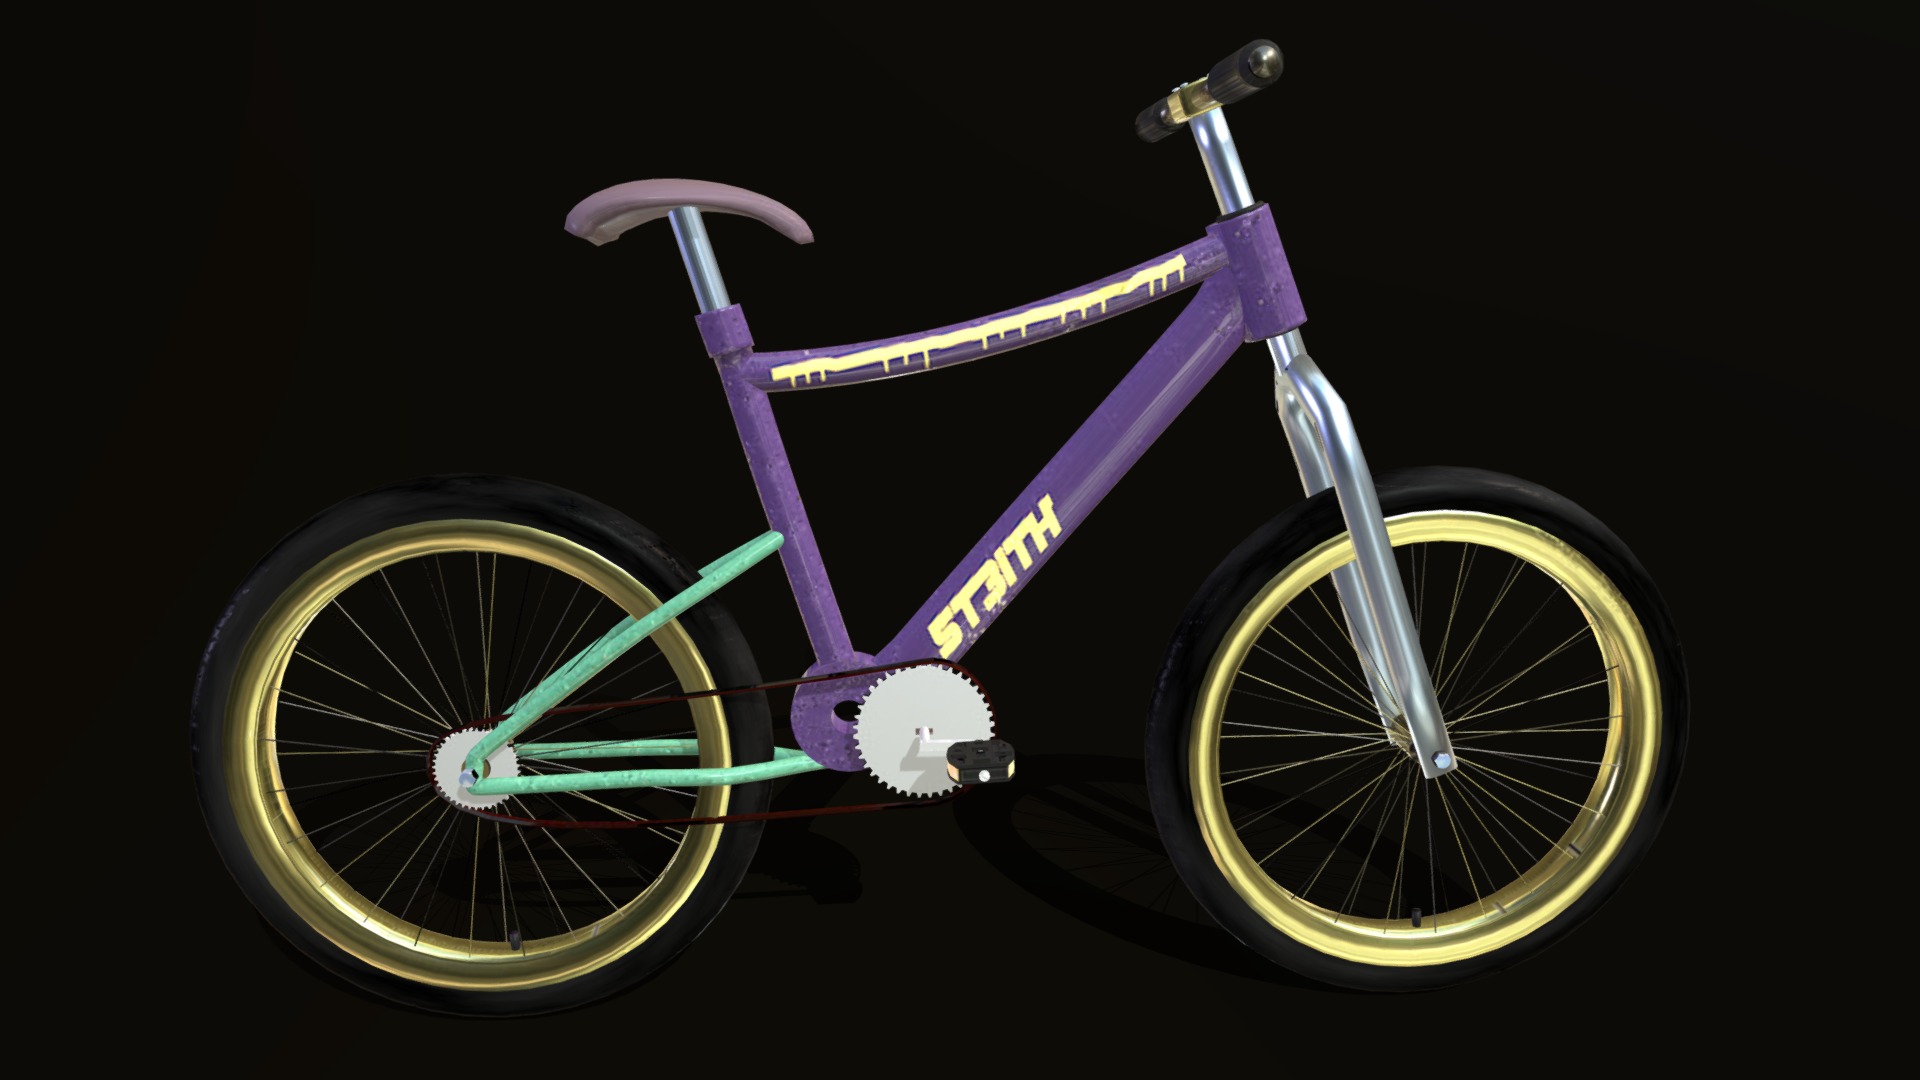 3D model 90s Bicycle with PBR Textures - This is a 3D model of the 90s Bicycle with PBR Textures. The 3D model is about a purple and green bicycle.